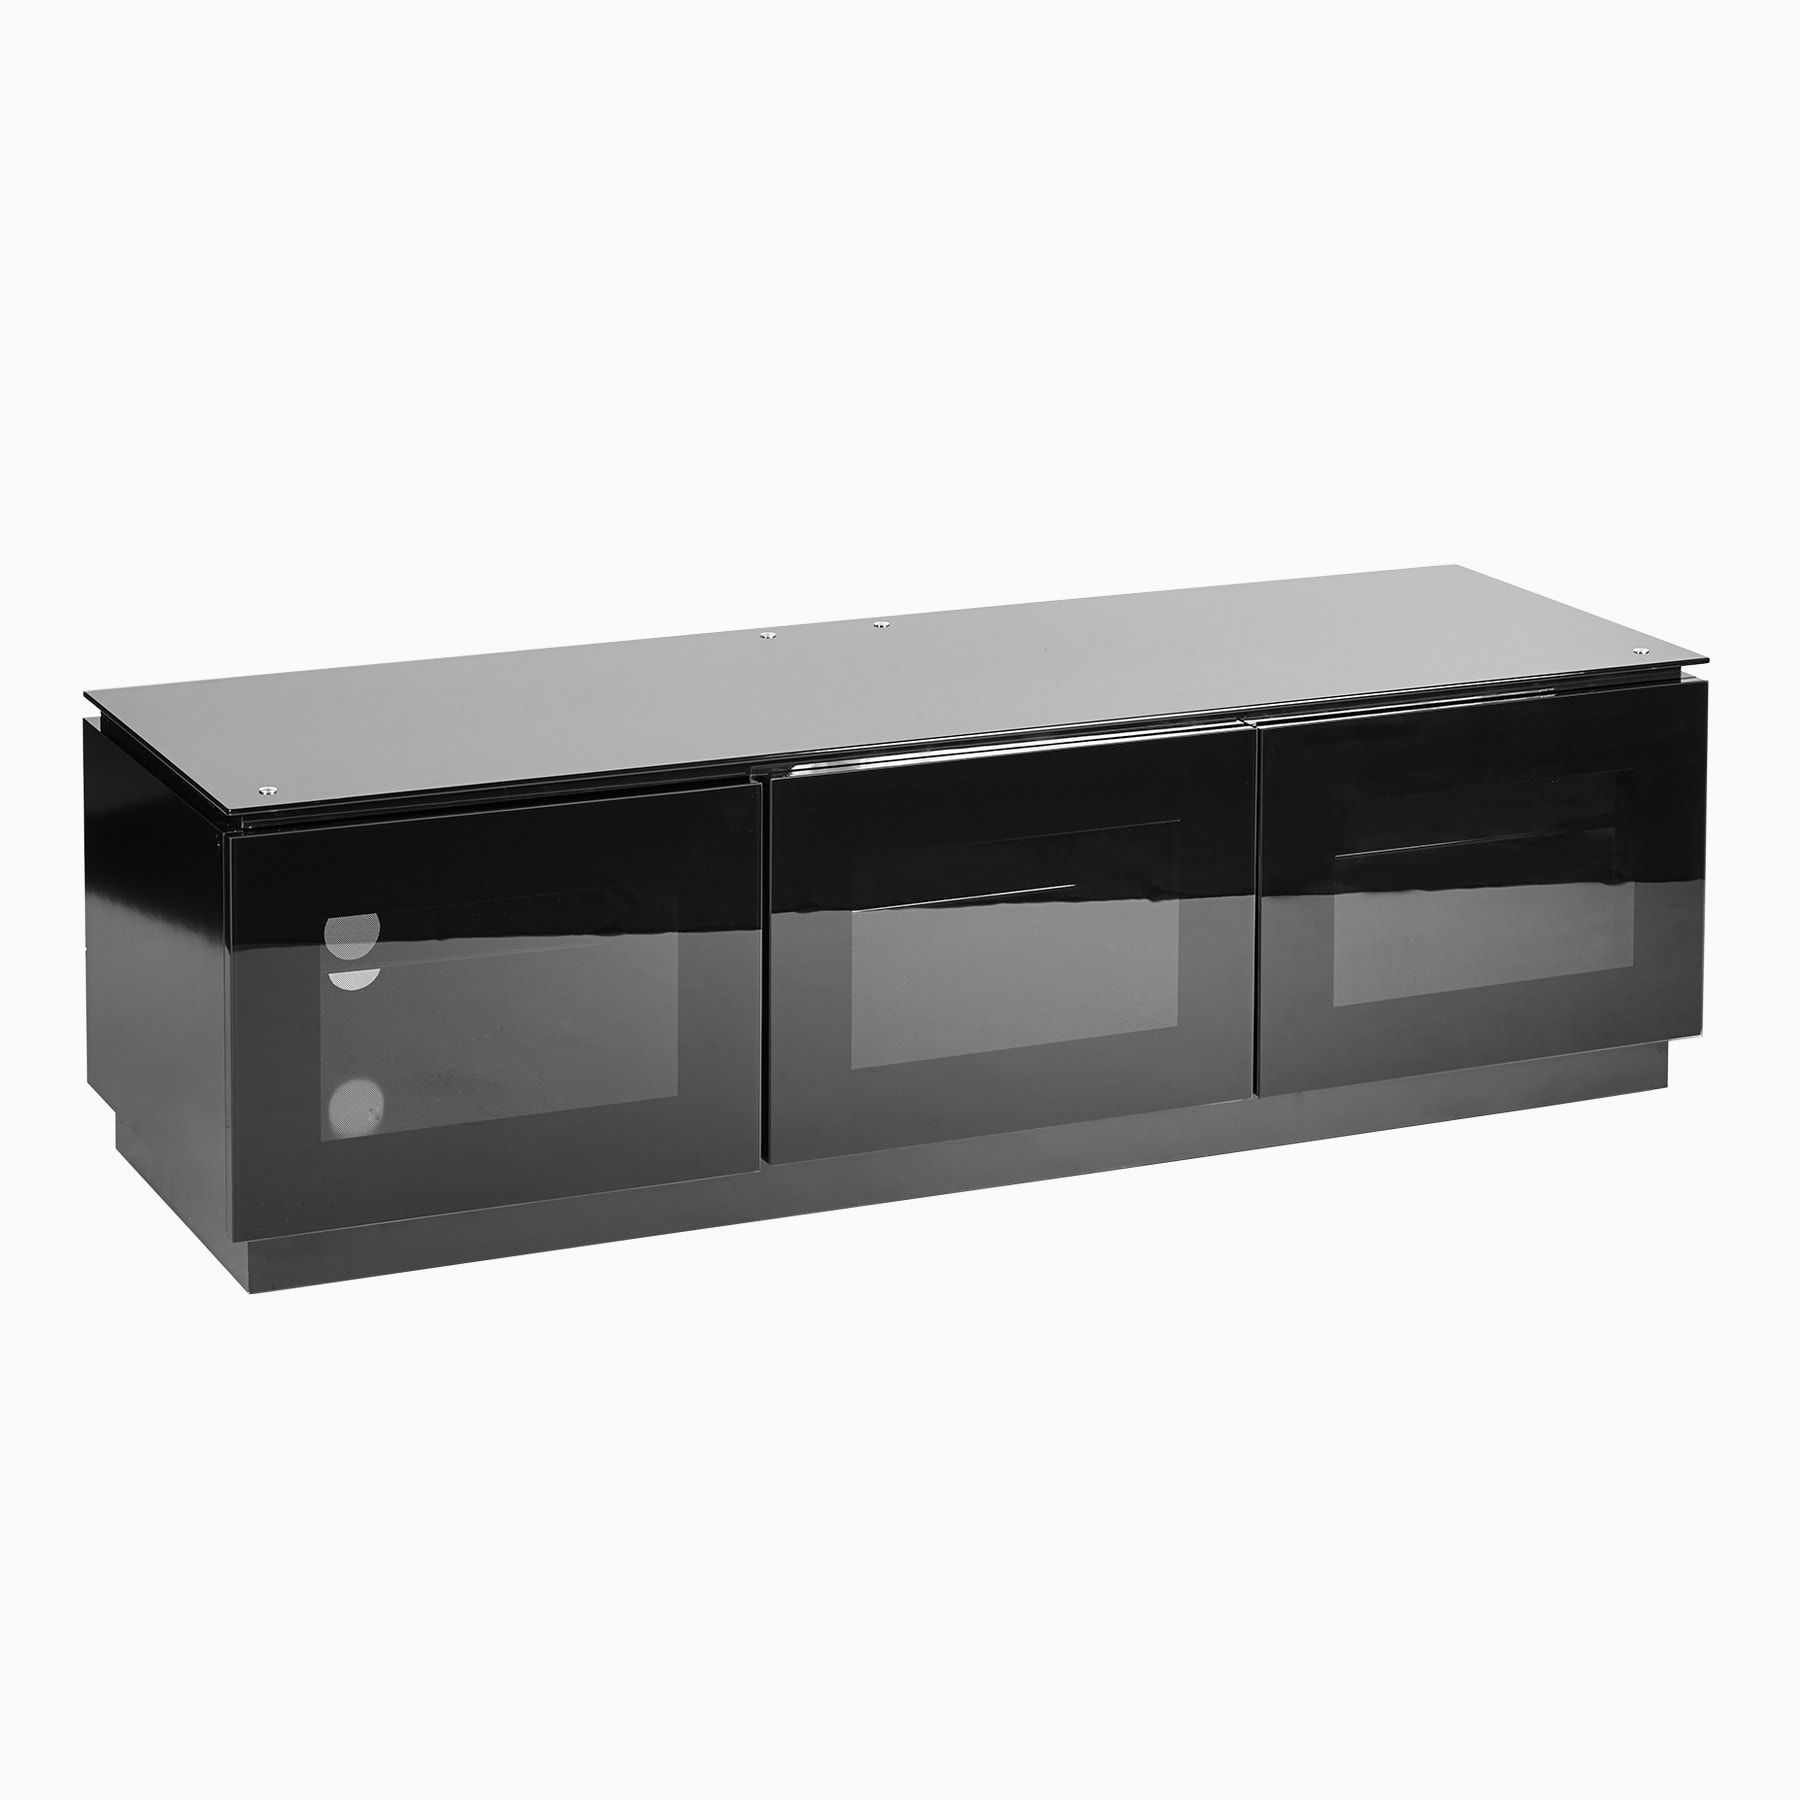 Black Gloss Tv Stand Up To 65 Inch Flat Tv | Mmt D1500 In Black Gloss Tv Stands (View 6 of 15)